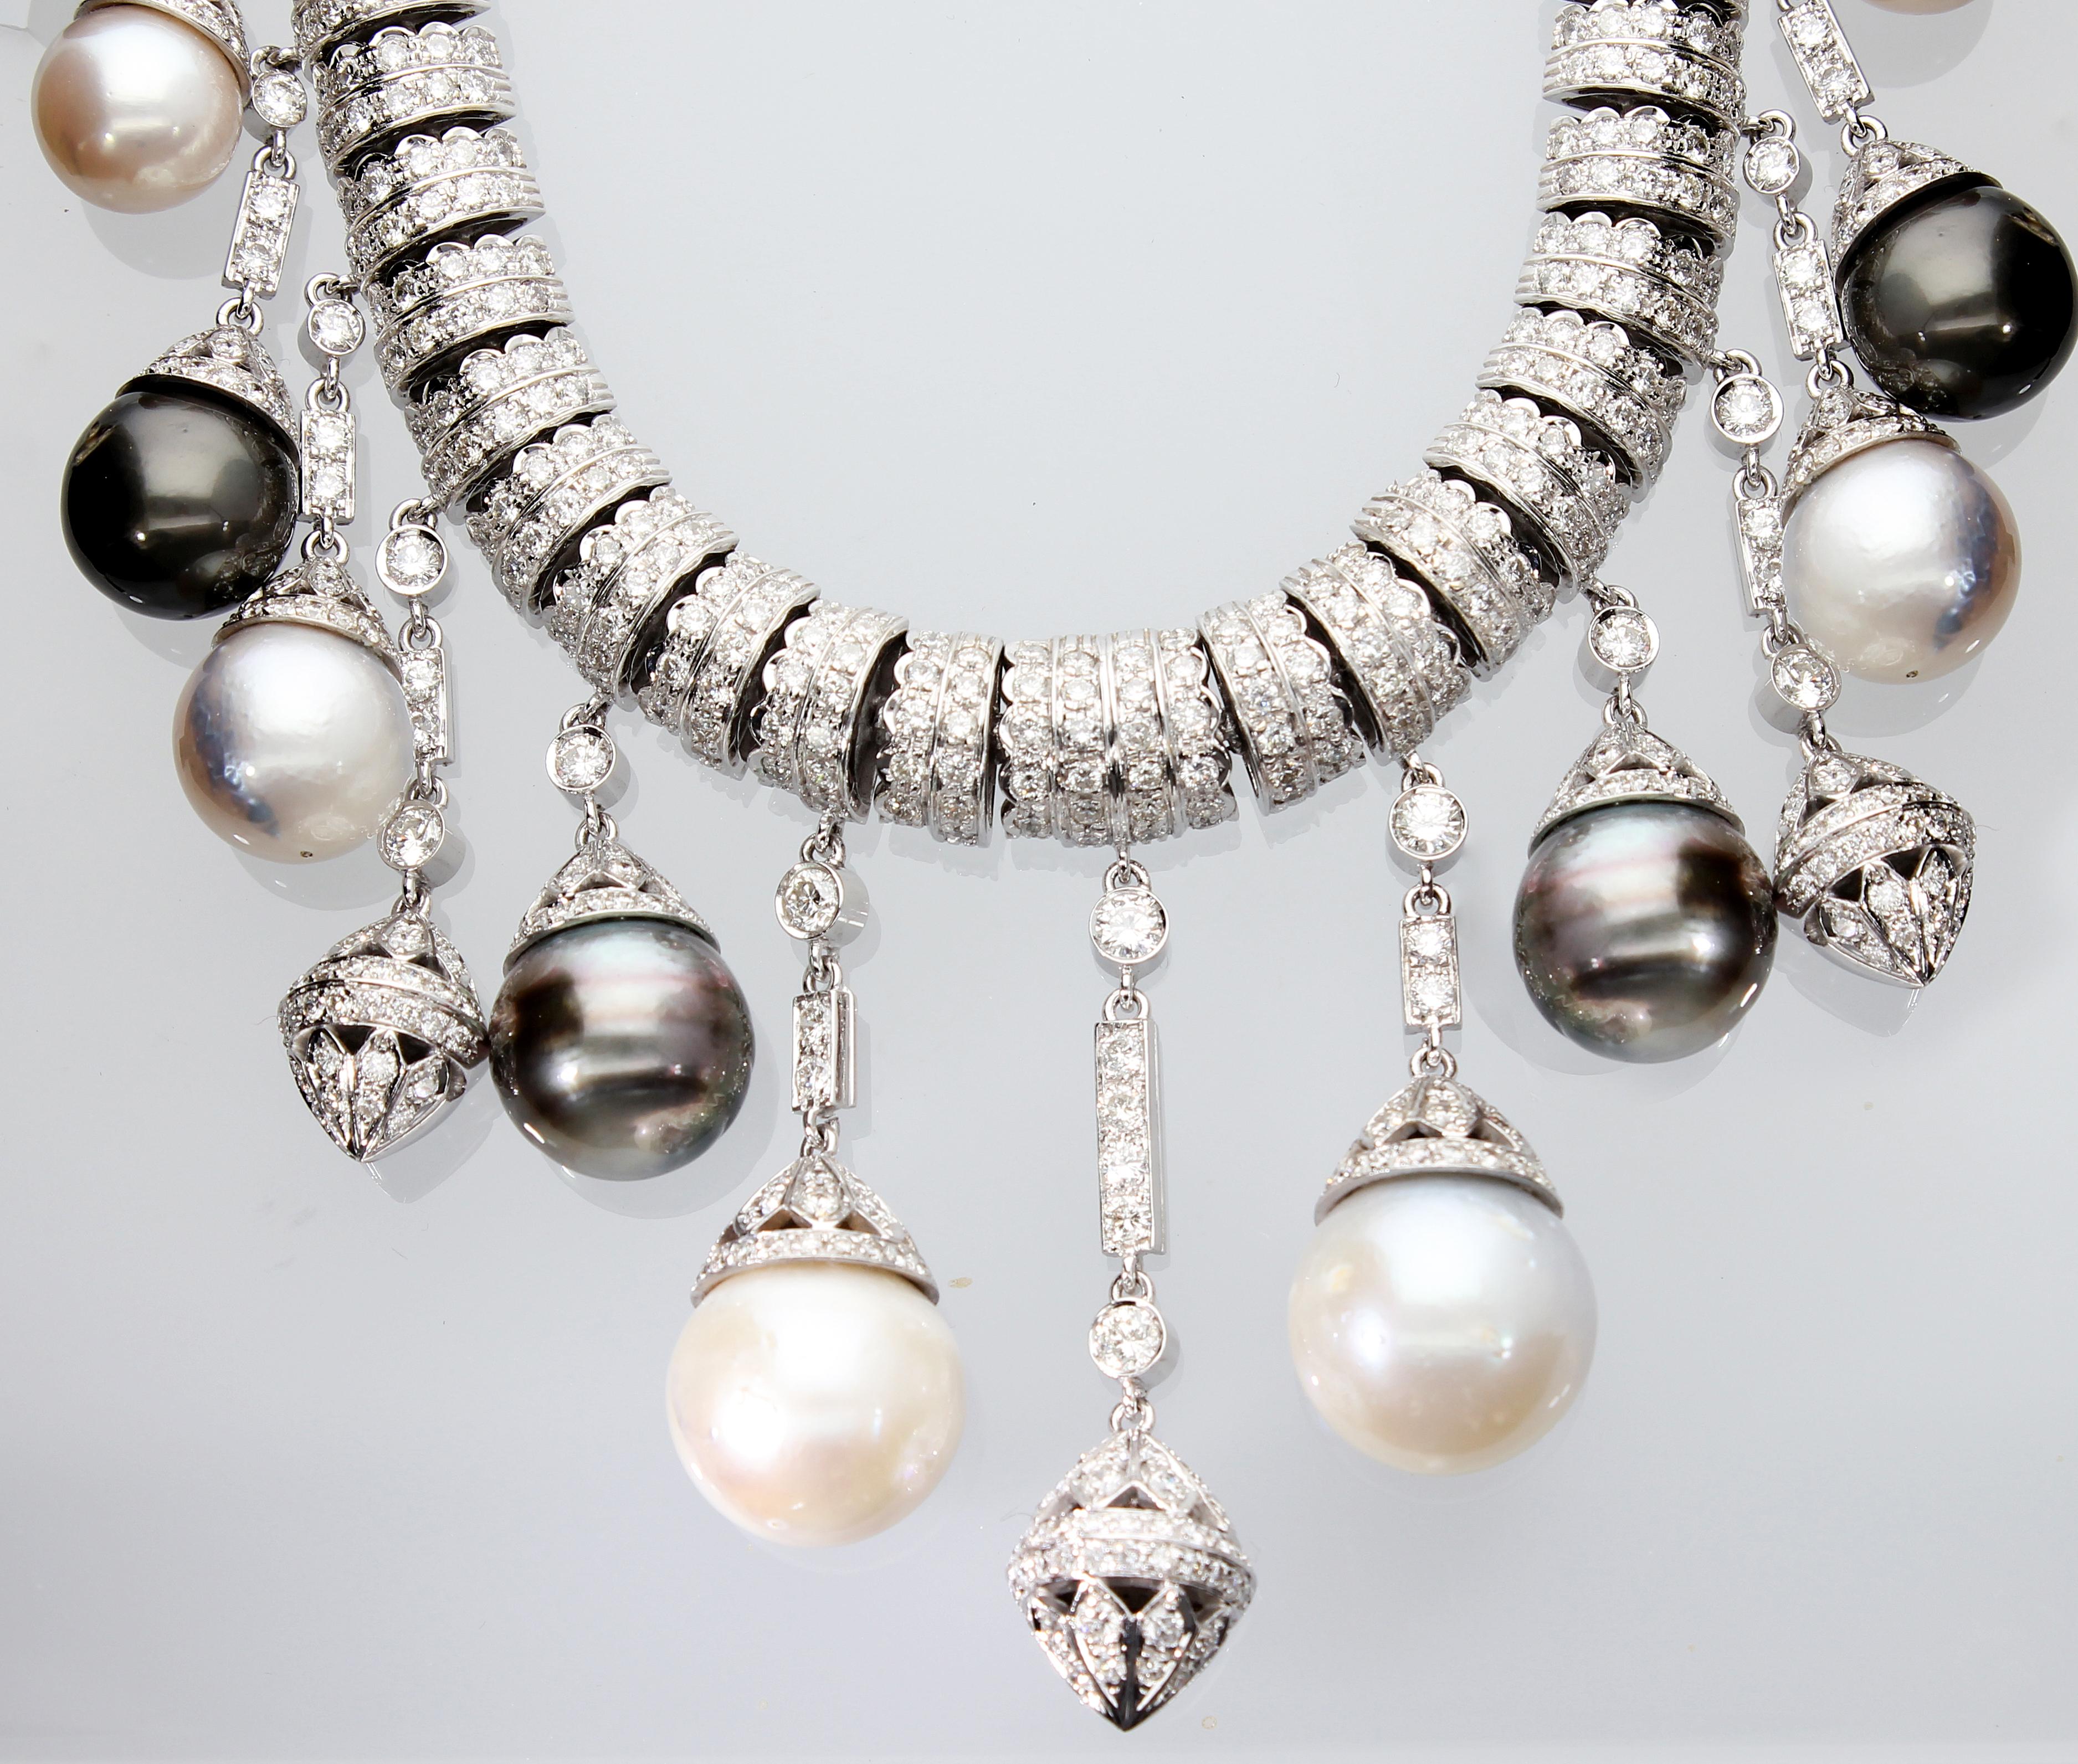 Necklace White Gold and Diamonds, Pendants with White and Black Pearls S.S. For Sale 7